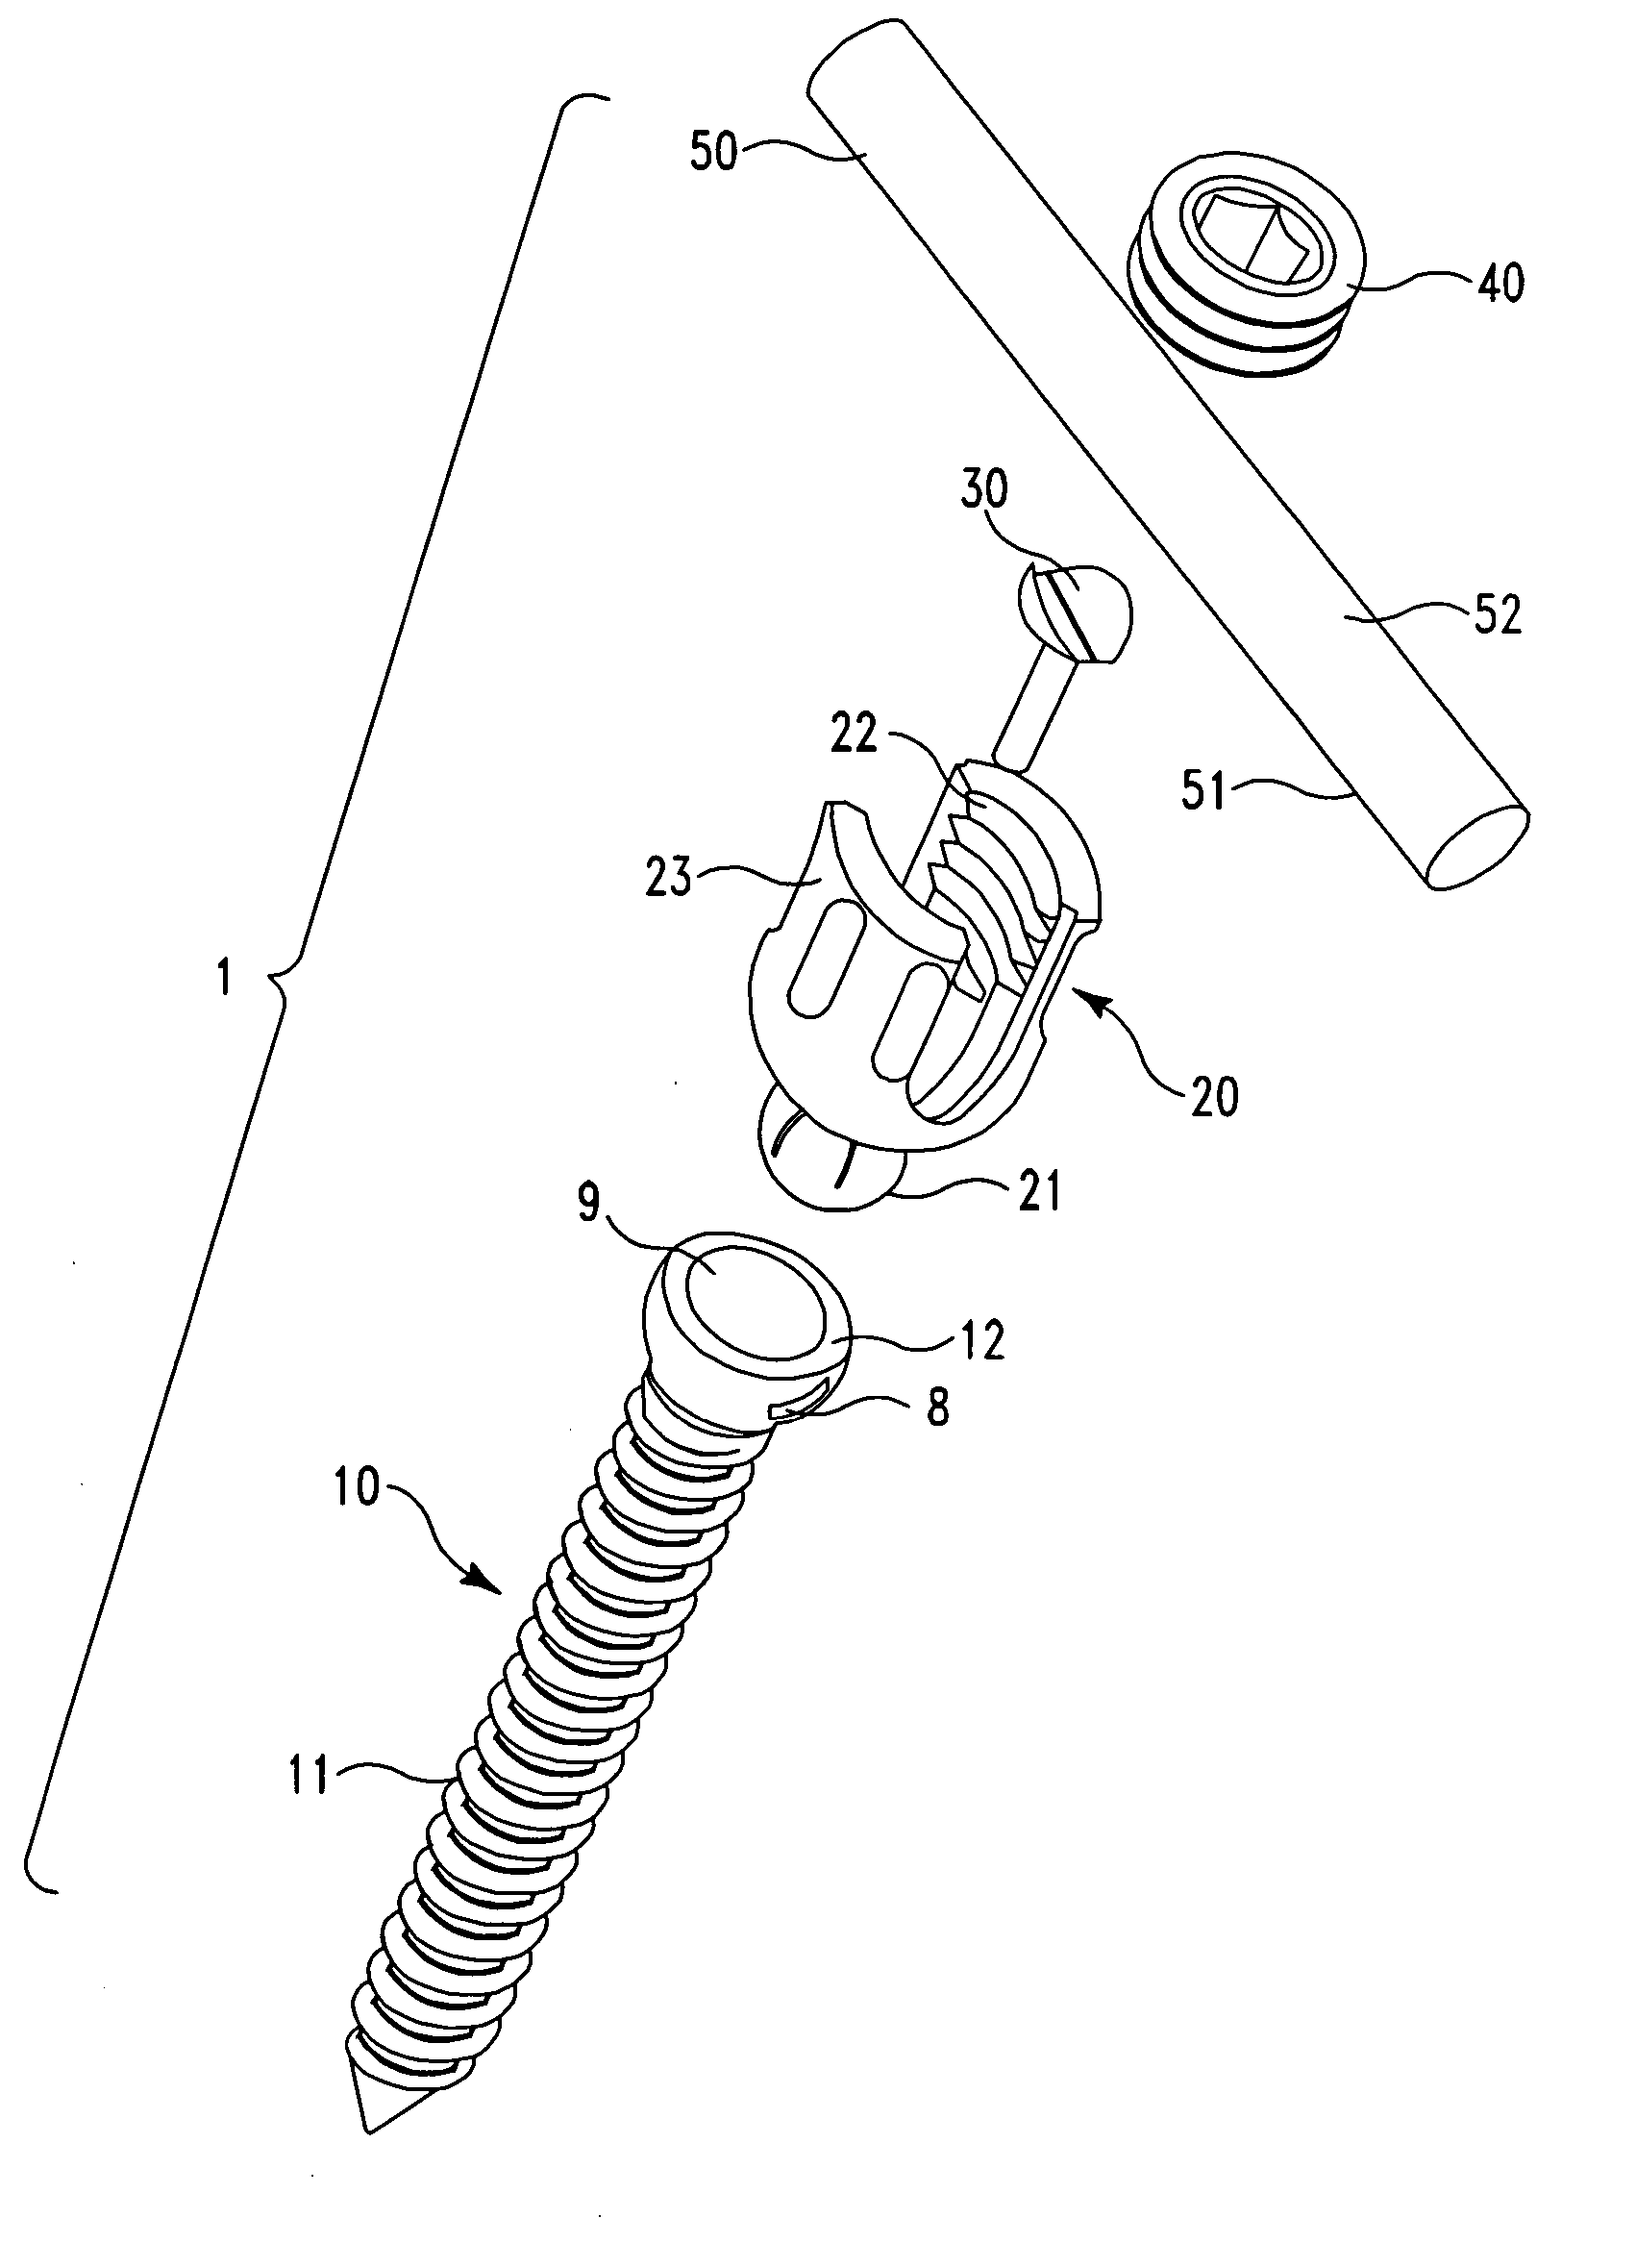 Polyaxial pedicle screw assembly